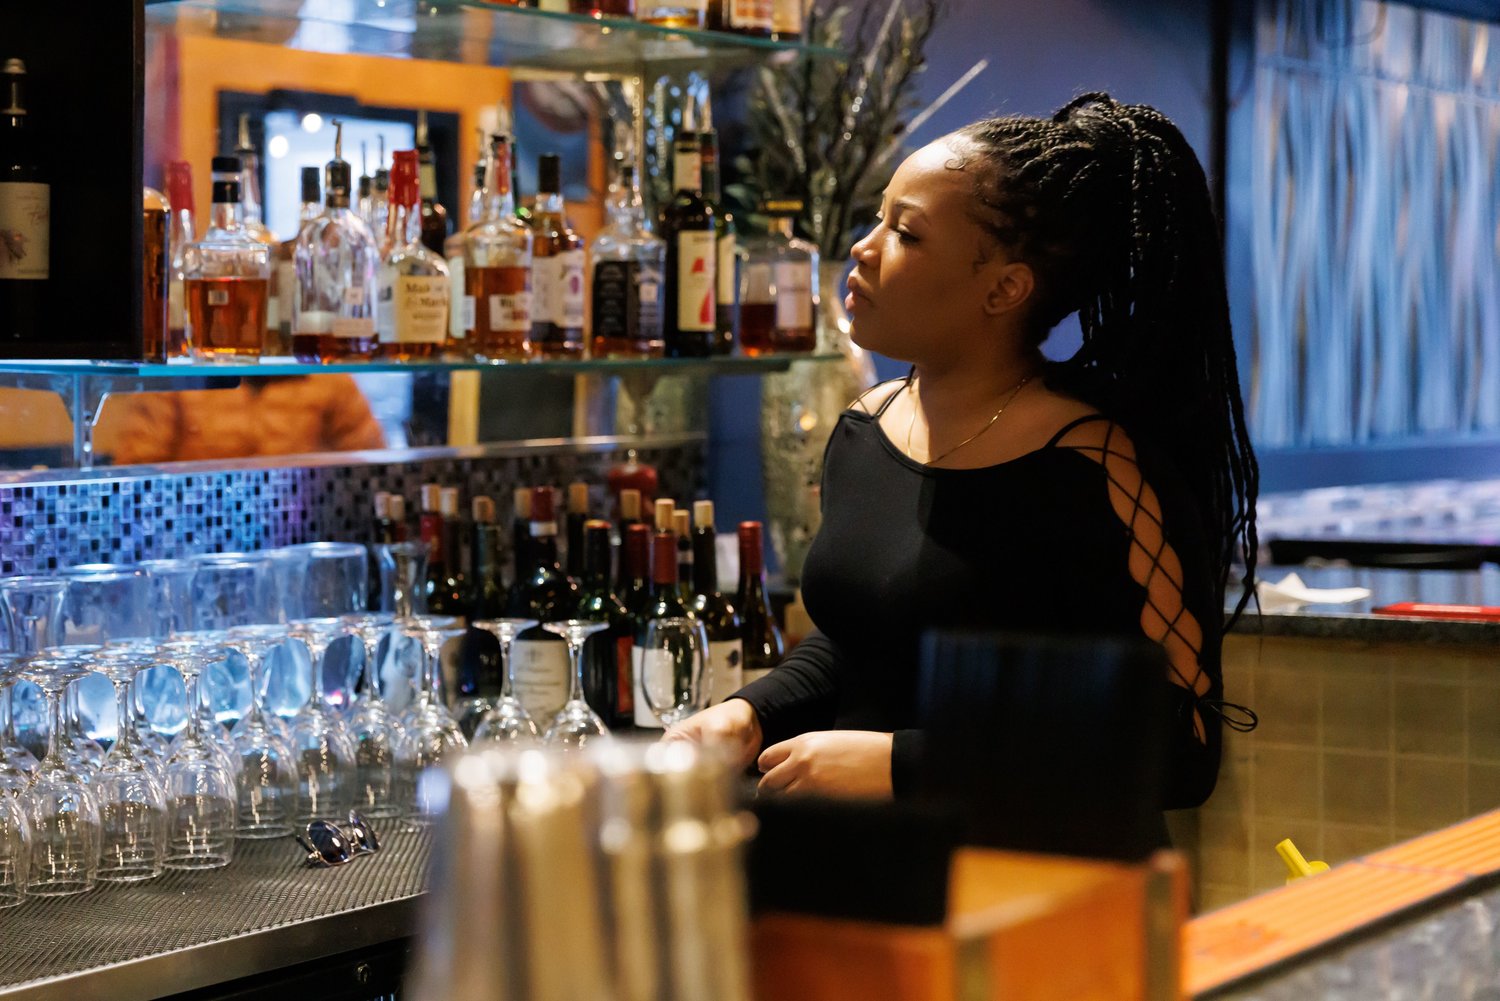 Shanniek Chambers, shift leader at Pierro's Italian Bistro, gets ready for customers at the bar.